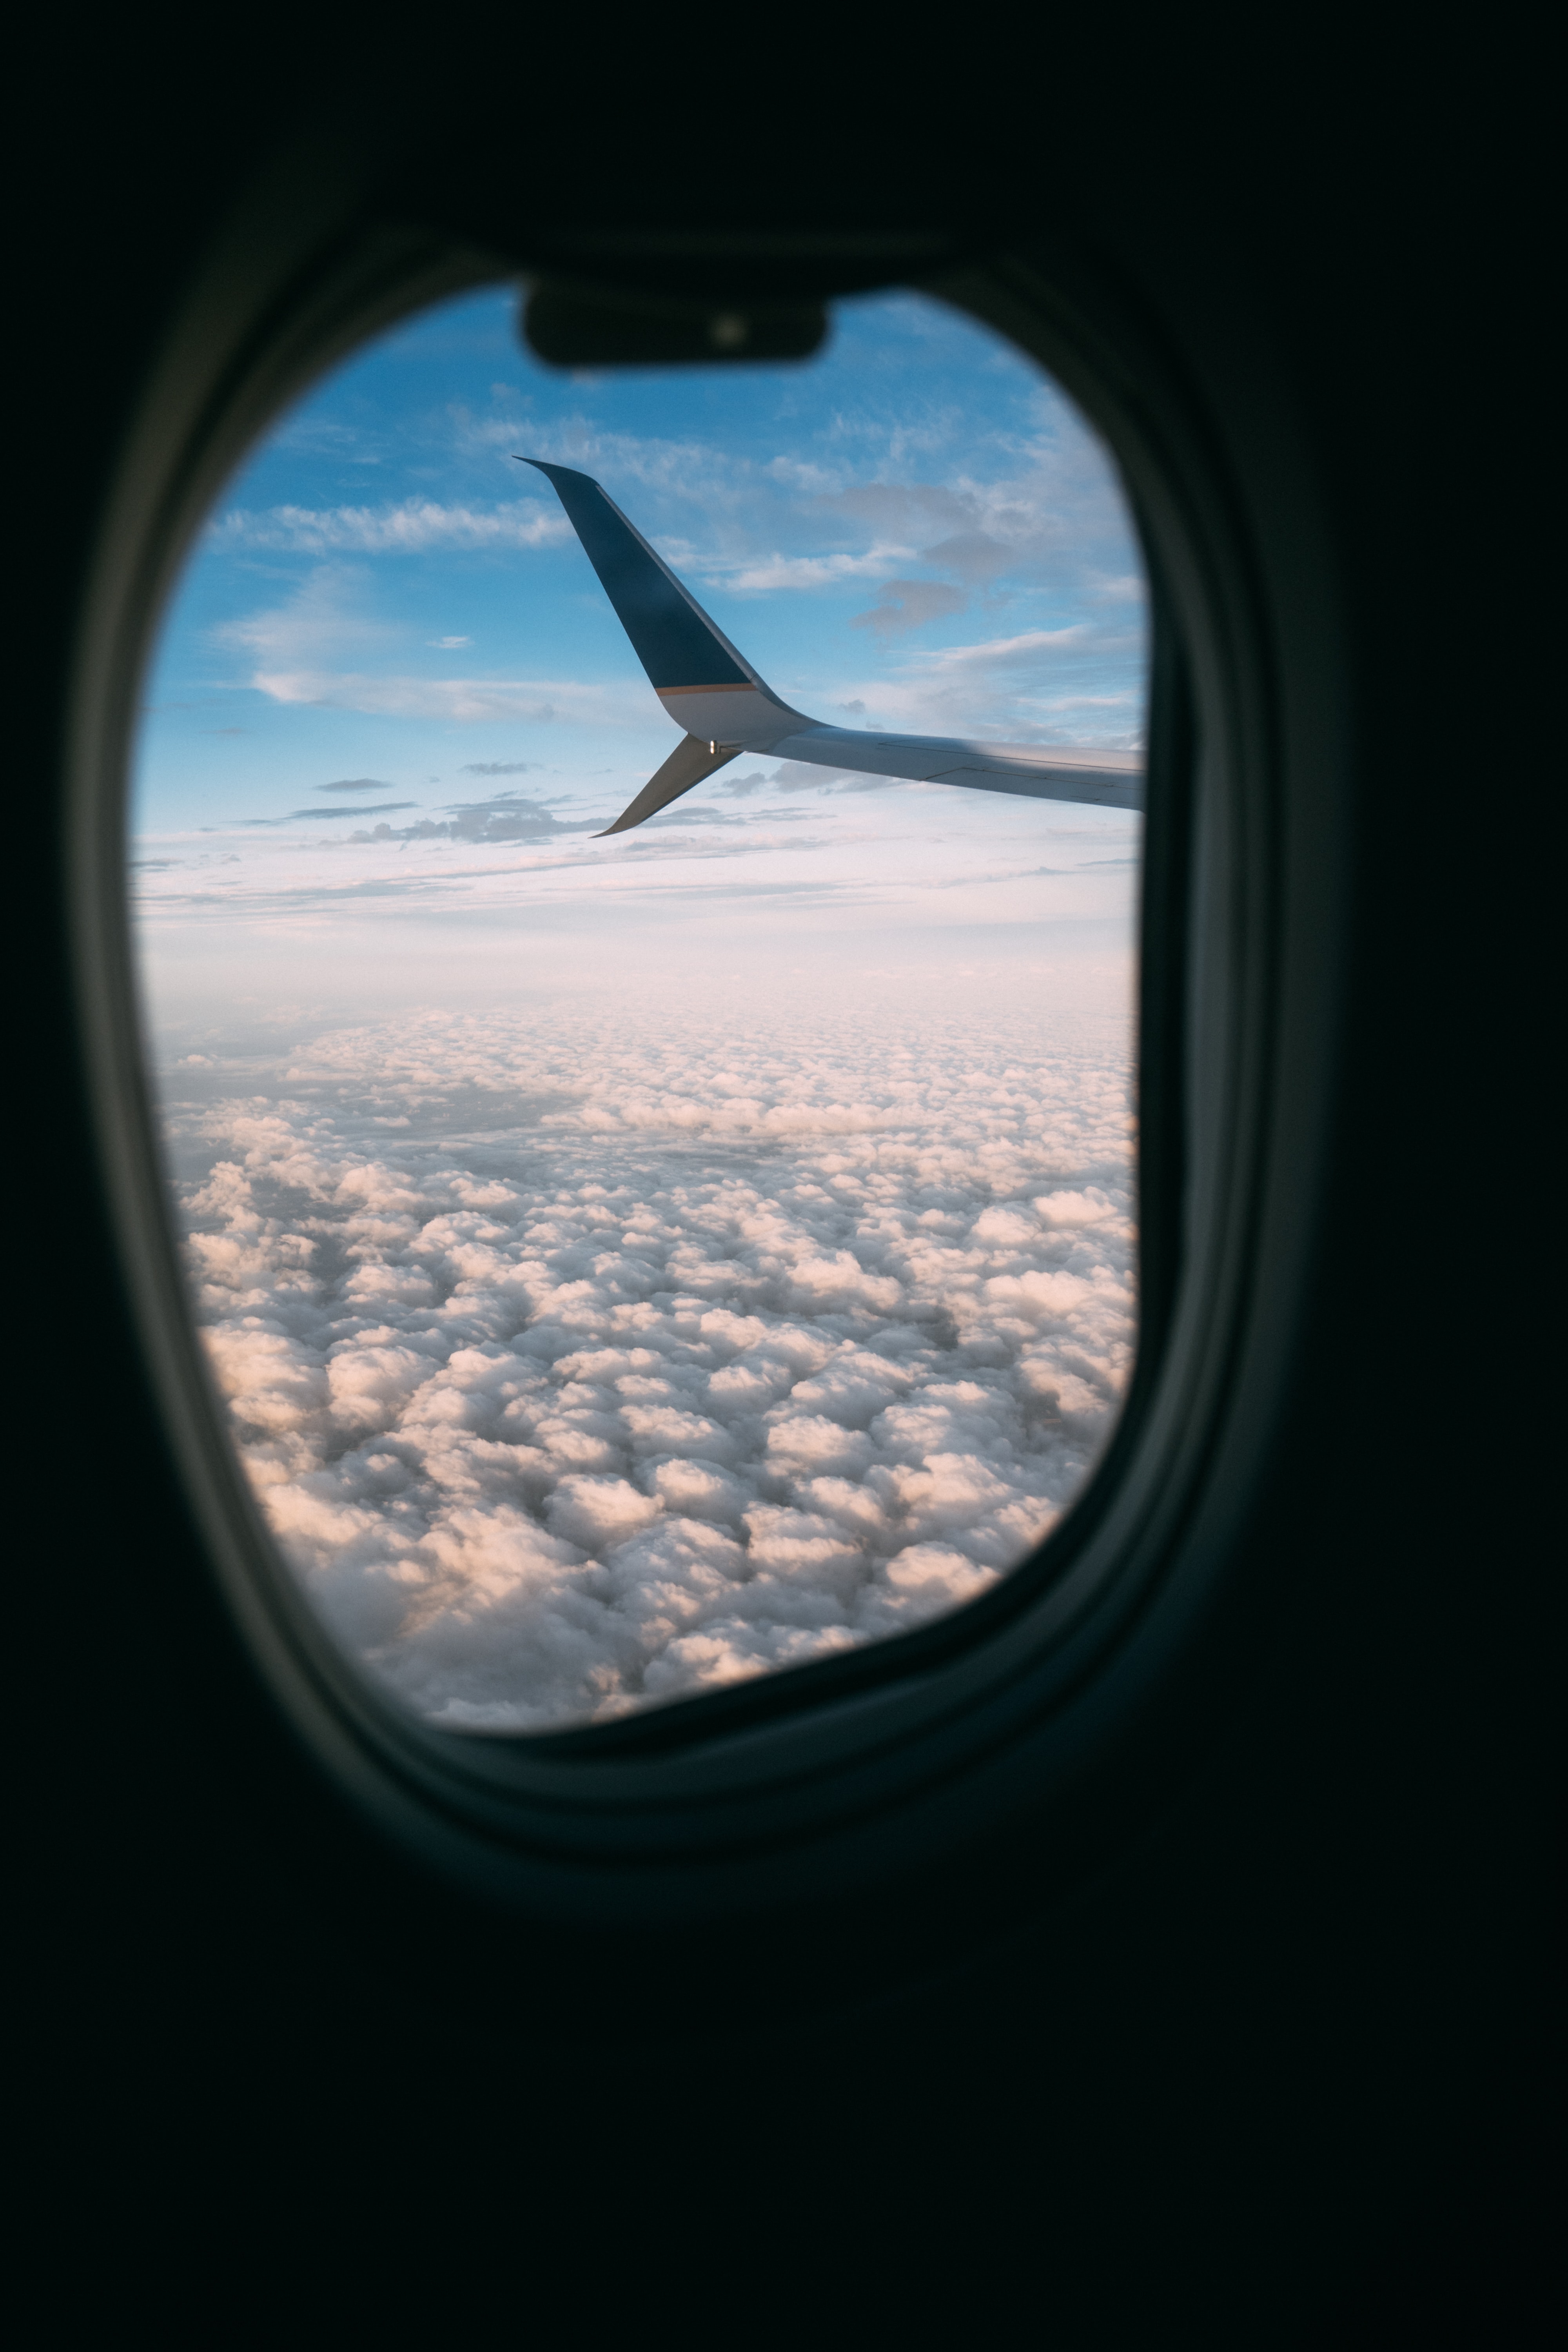 plane, clouds, porthole, miscellanea, miscellaneous, wing, airplane, view